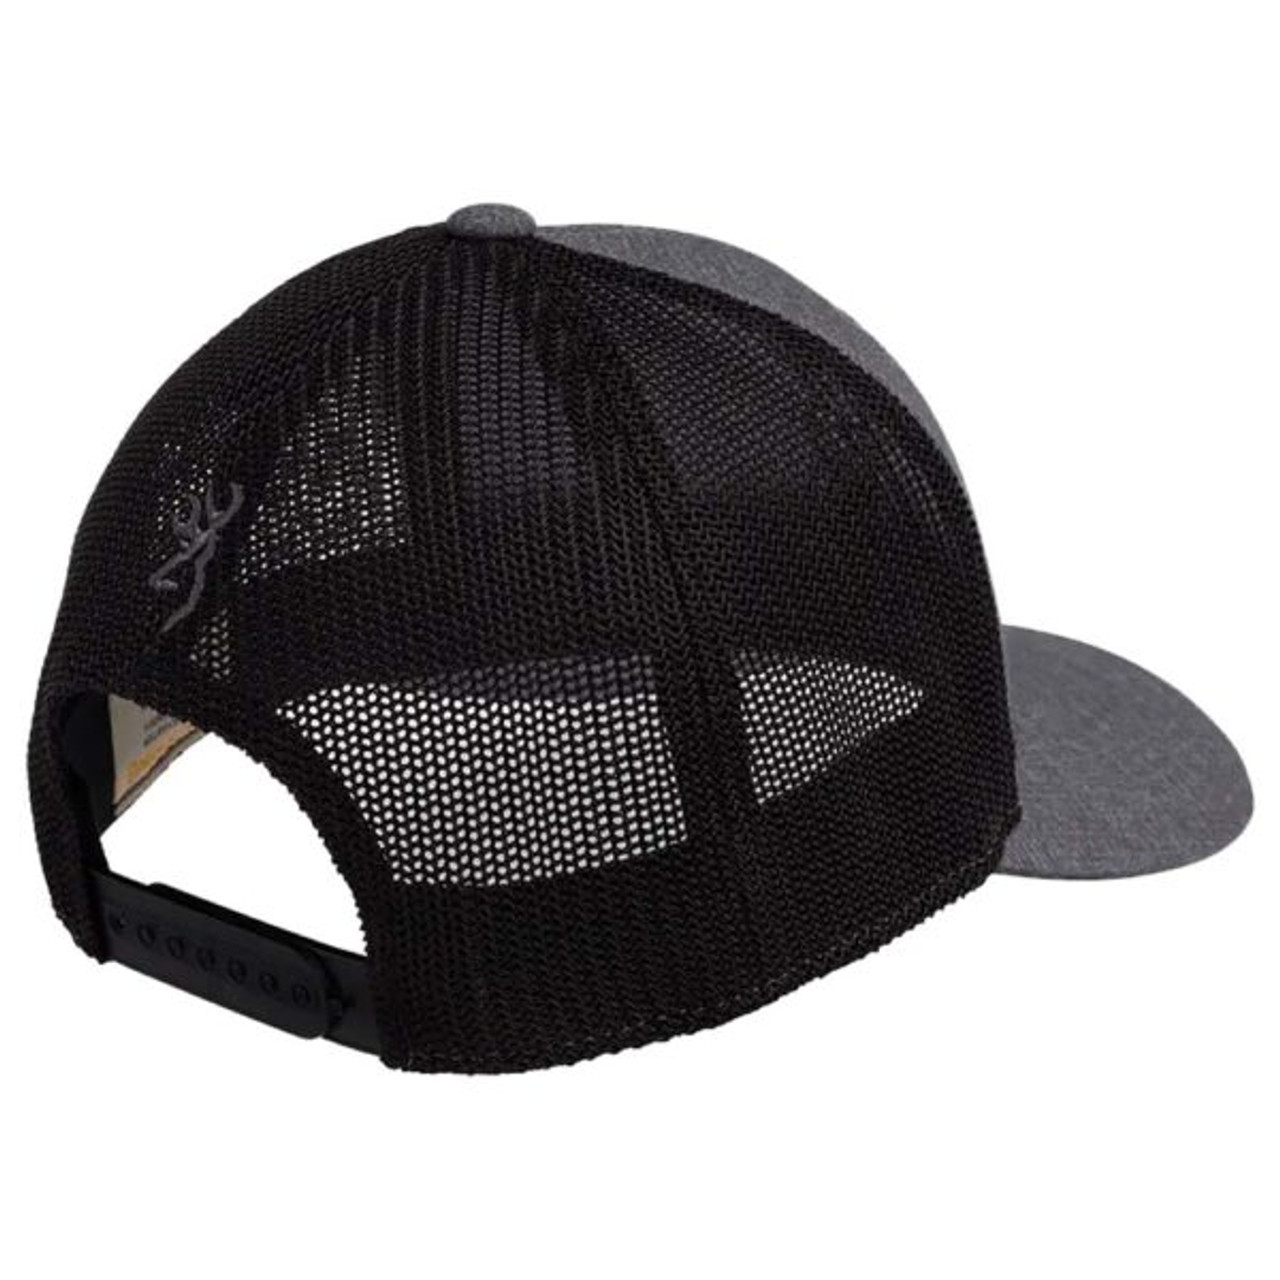 Browning Realm Cap-Charcoal- Back